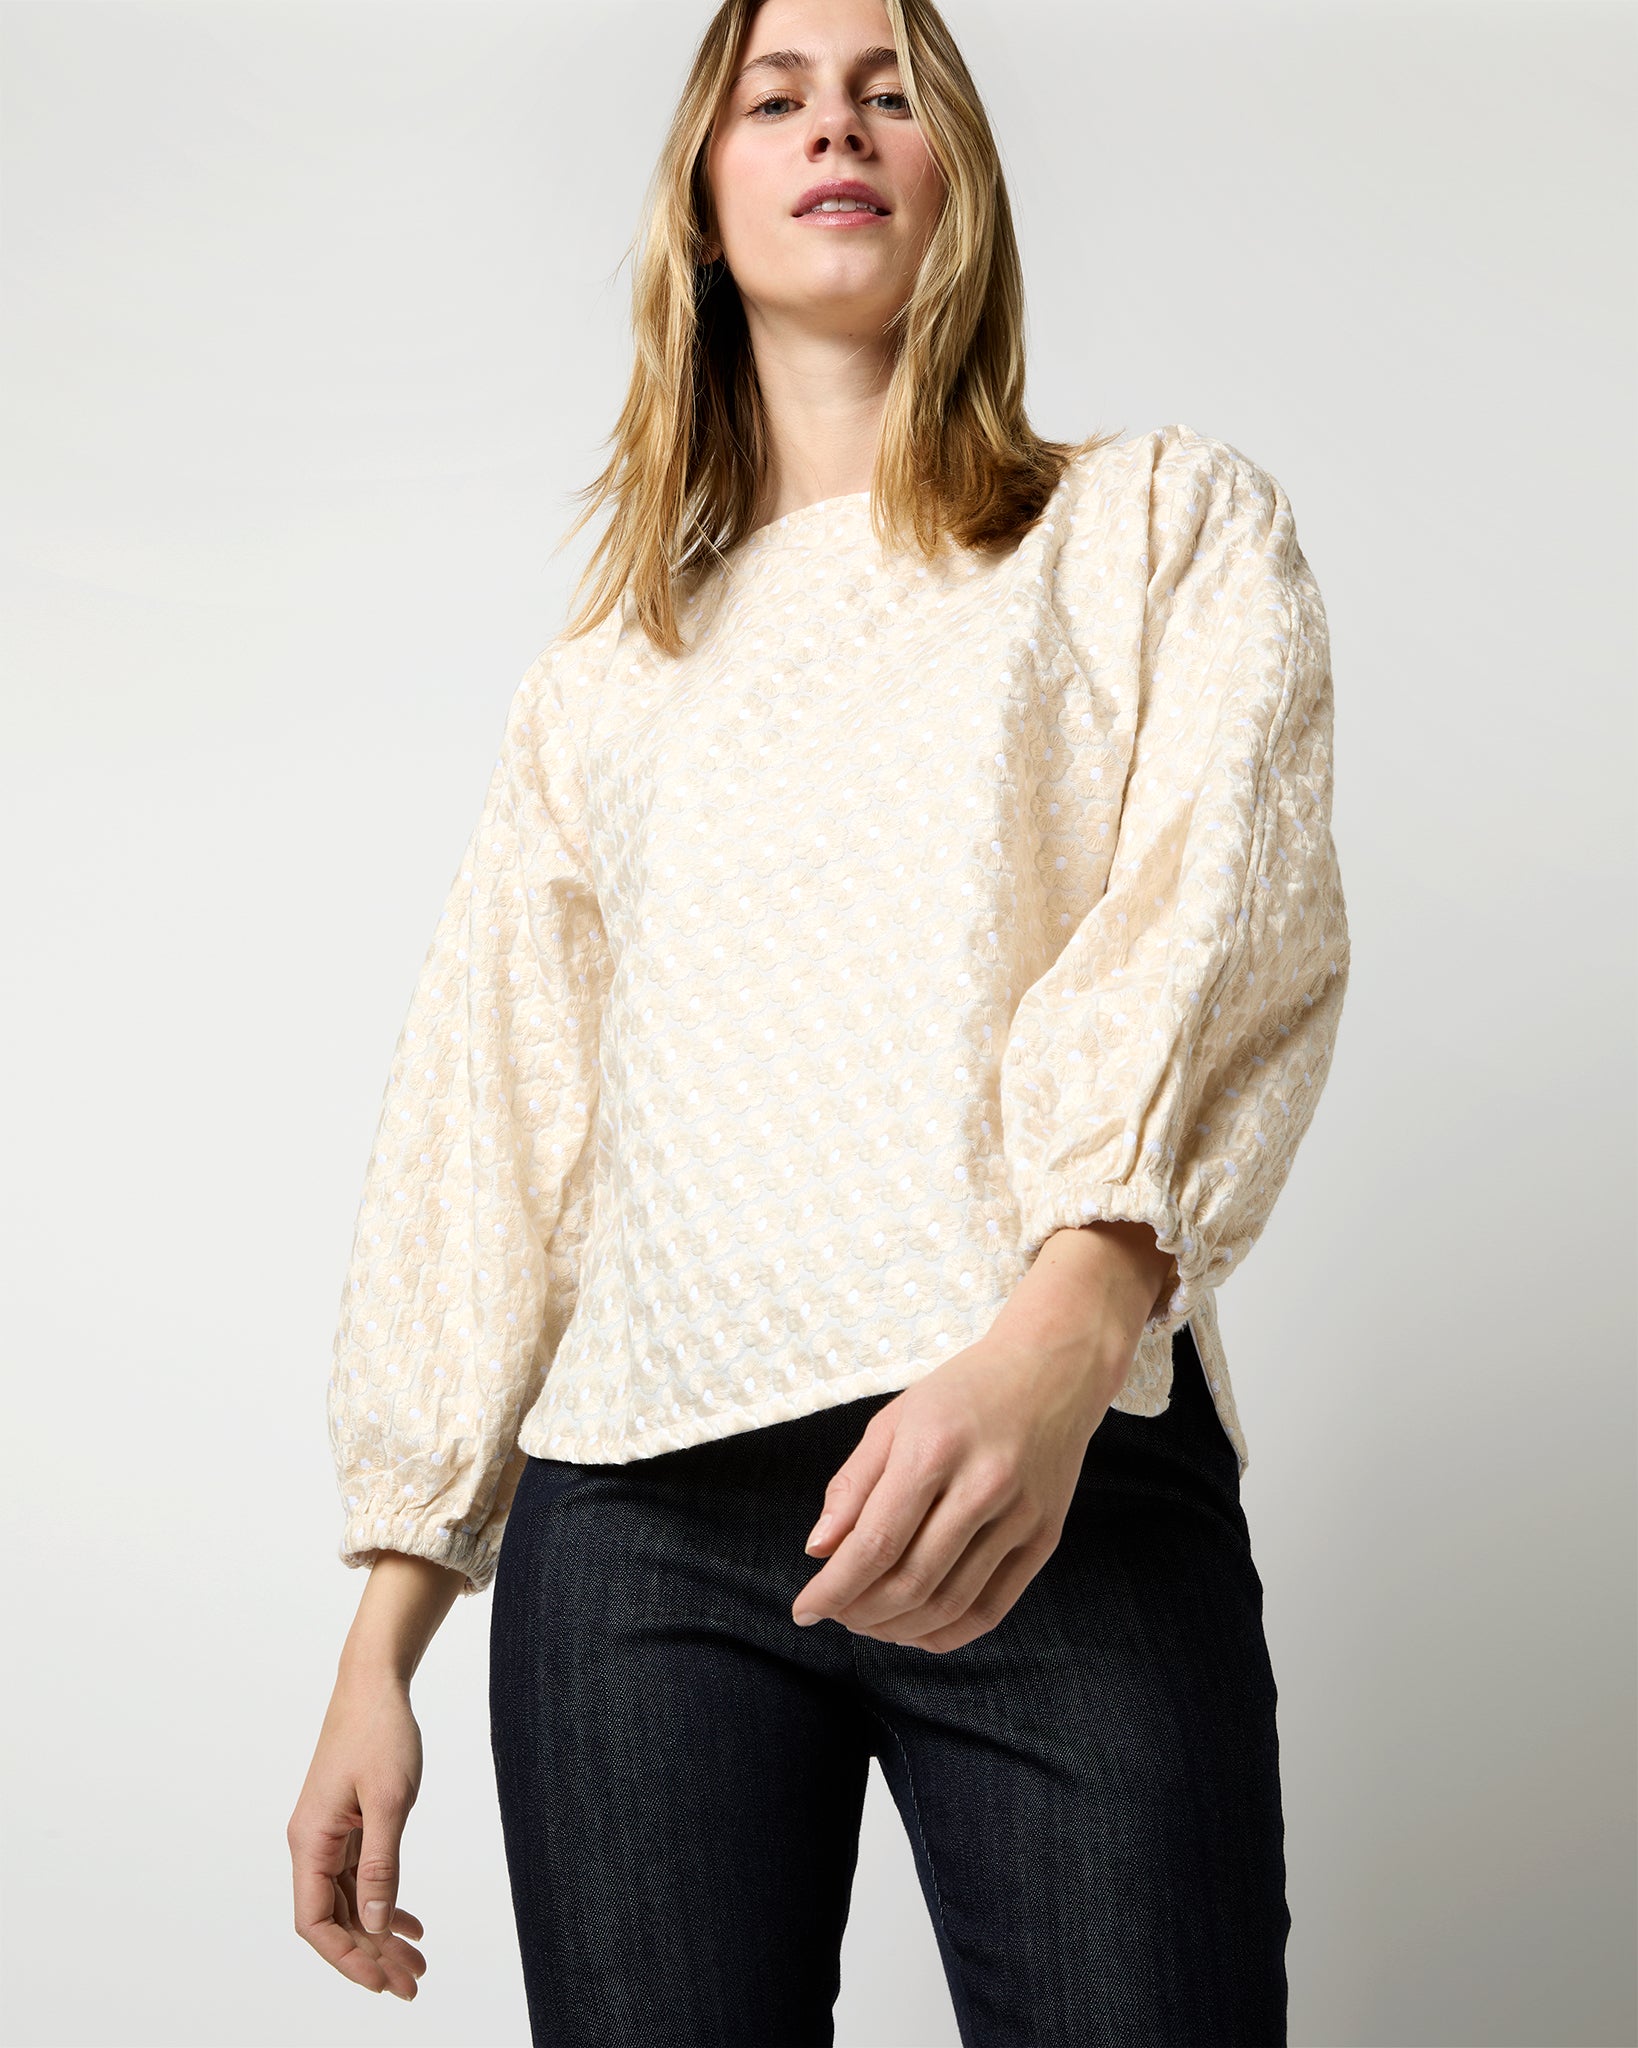 Elora Volume Top in Ivory Floral Embroidered Poplin